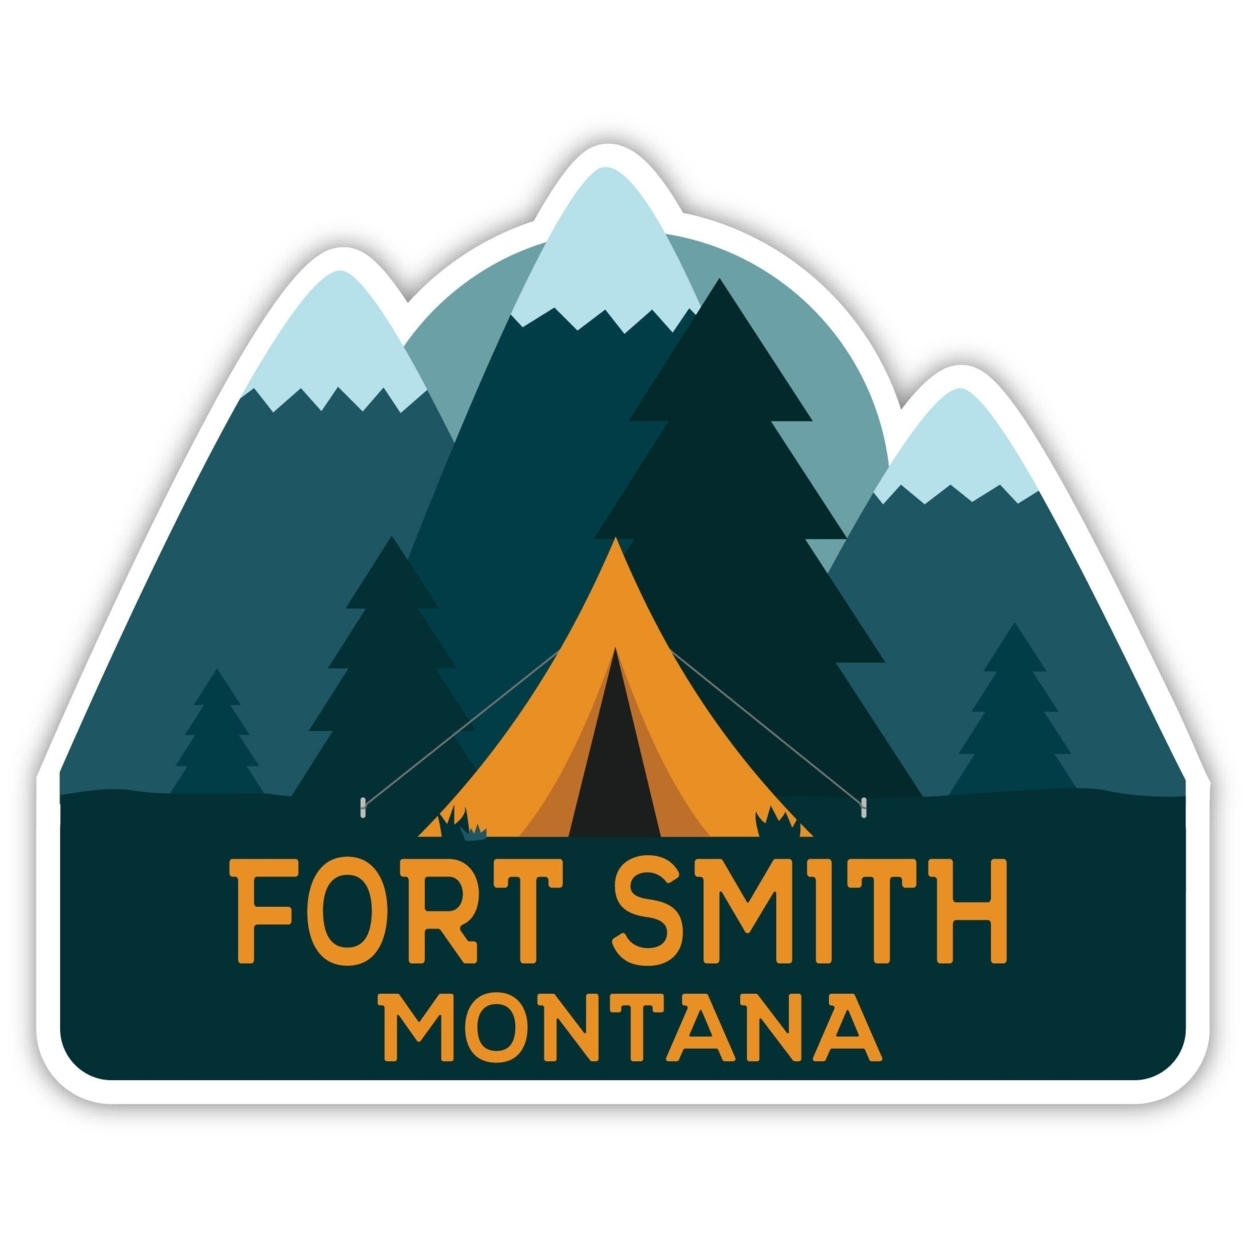 Fort Smith Montana Souvenir Decorative Stickers (Choose Theme And Size) - 4-Pack, 4-Inch, Bear